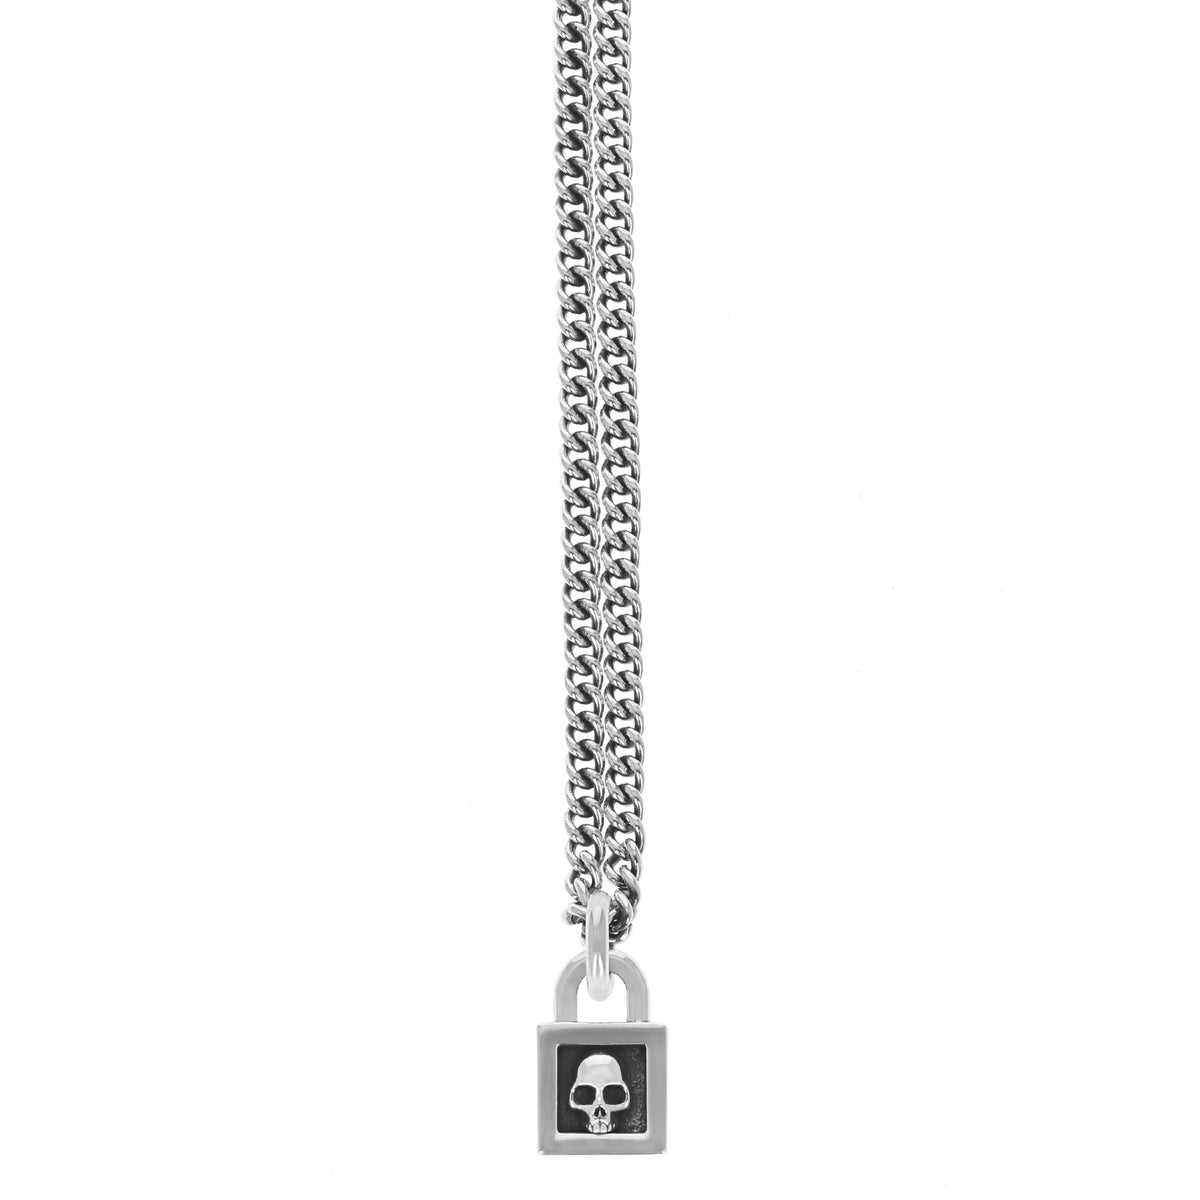 Skull Key and Lock Necklace Handmade in Sterling Silver With